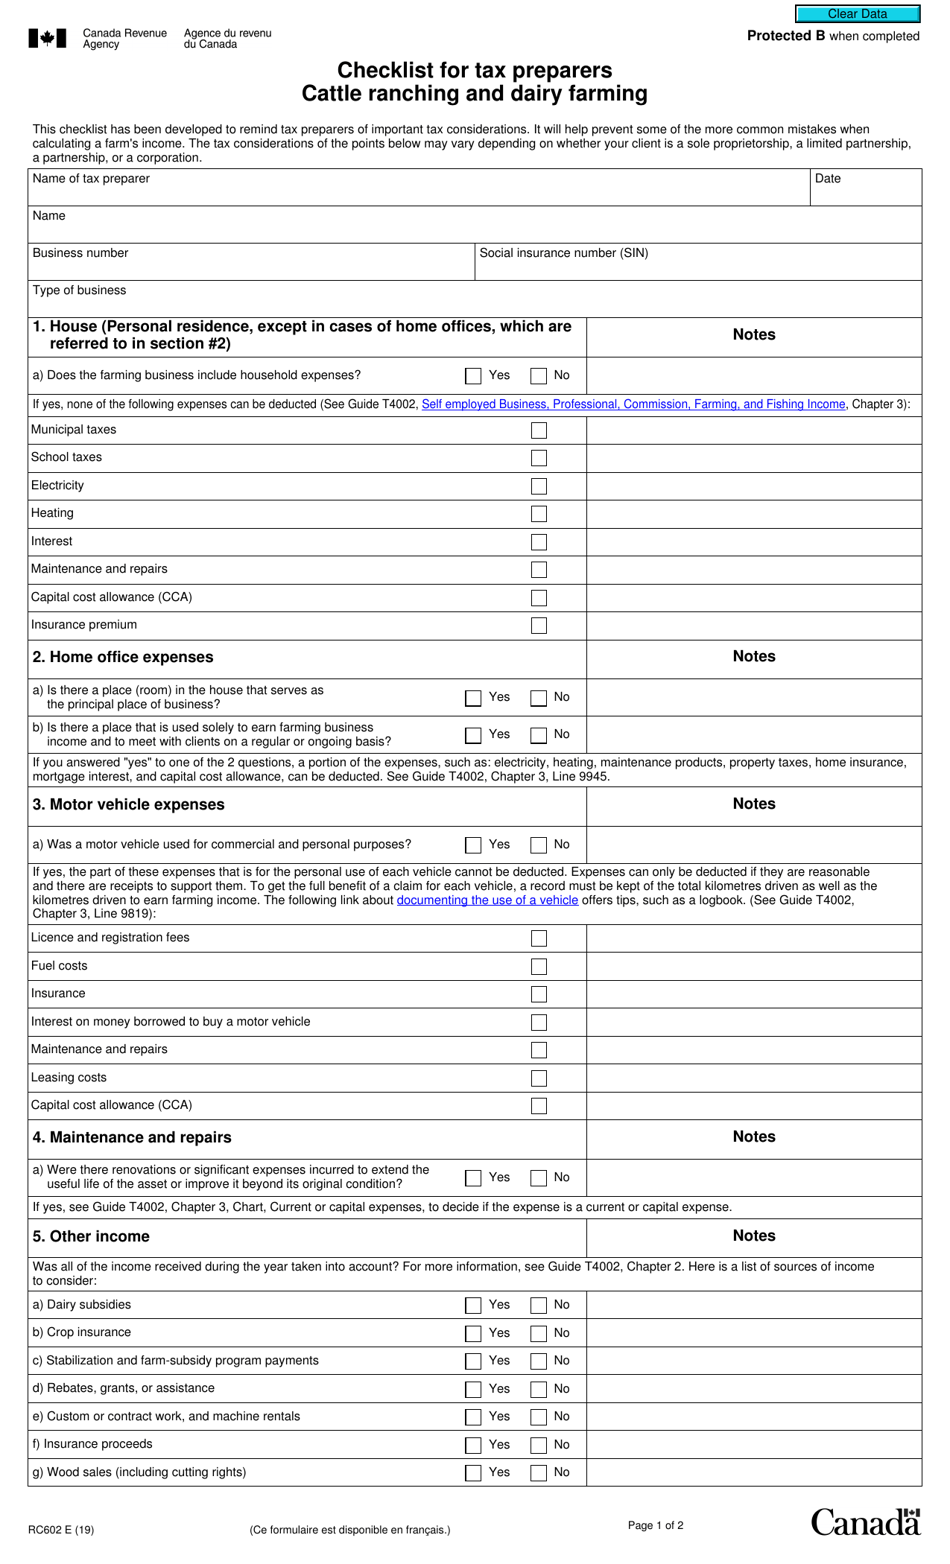 Form RC602 Checklist for Tax Preparers - Cattle Ranching and Dairy Farming - Canada, Page 1